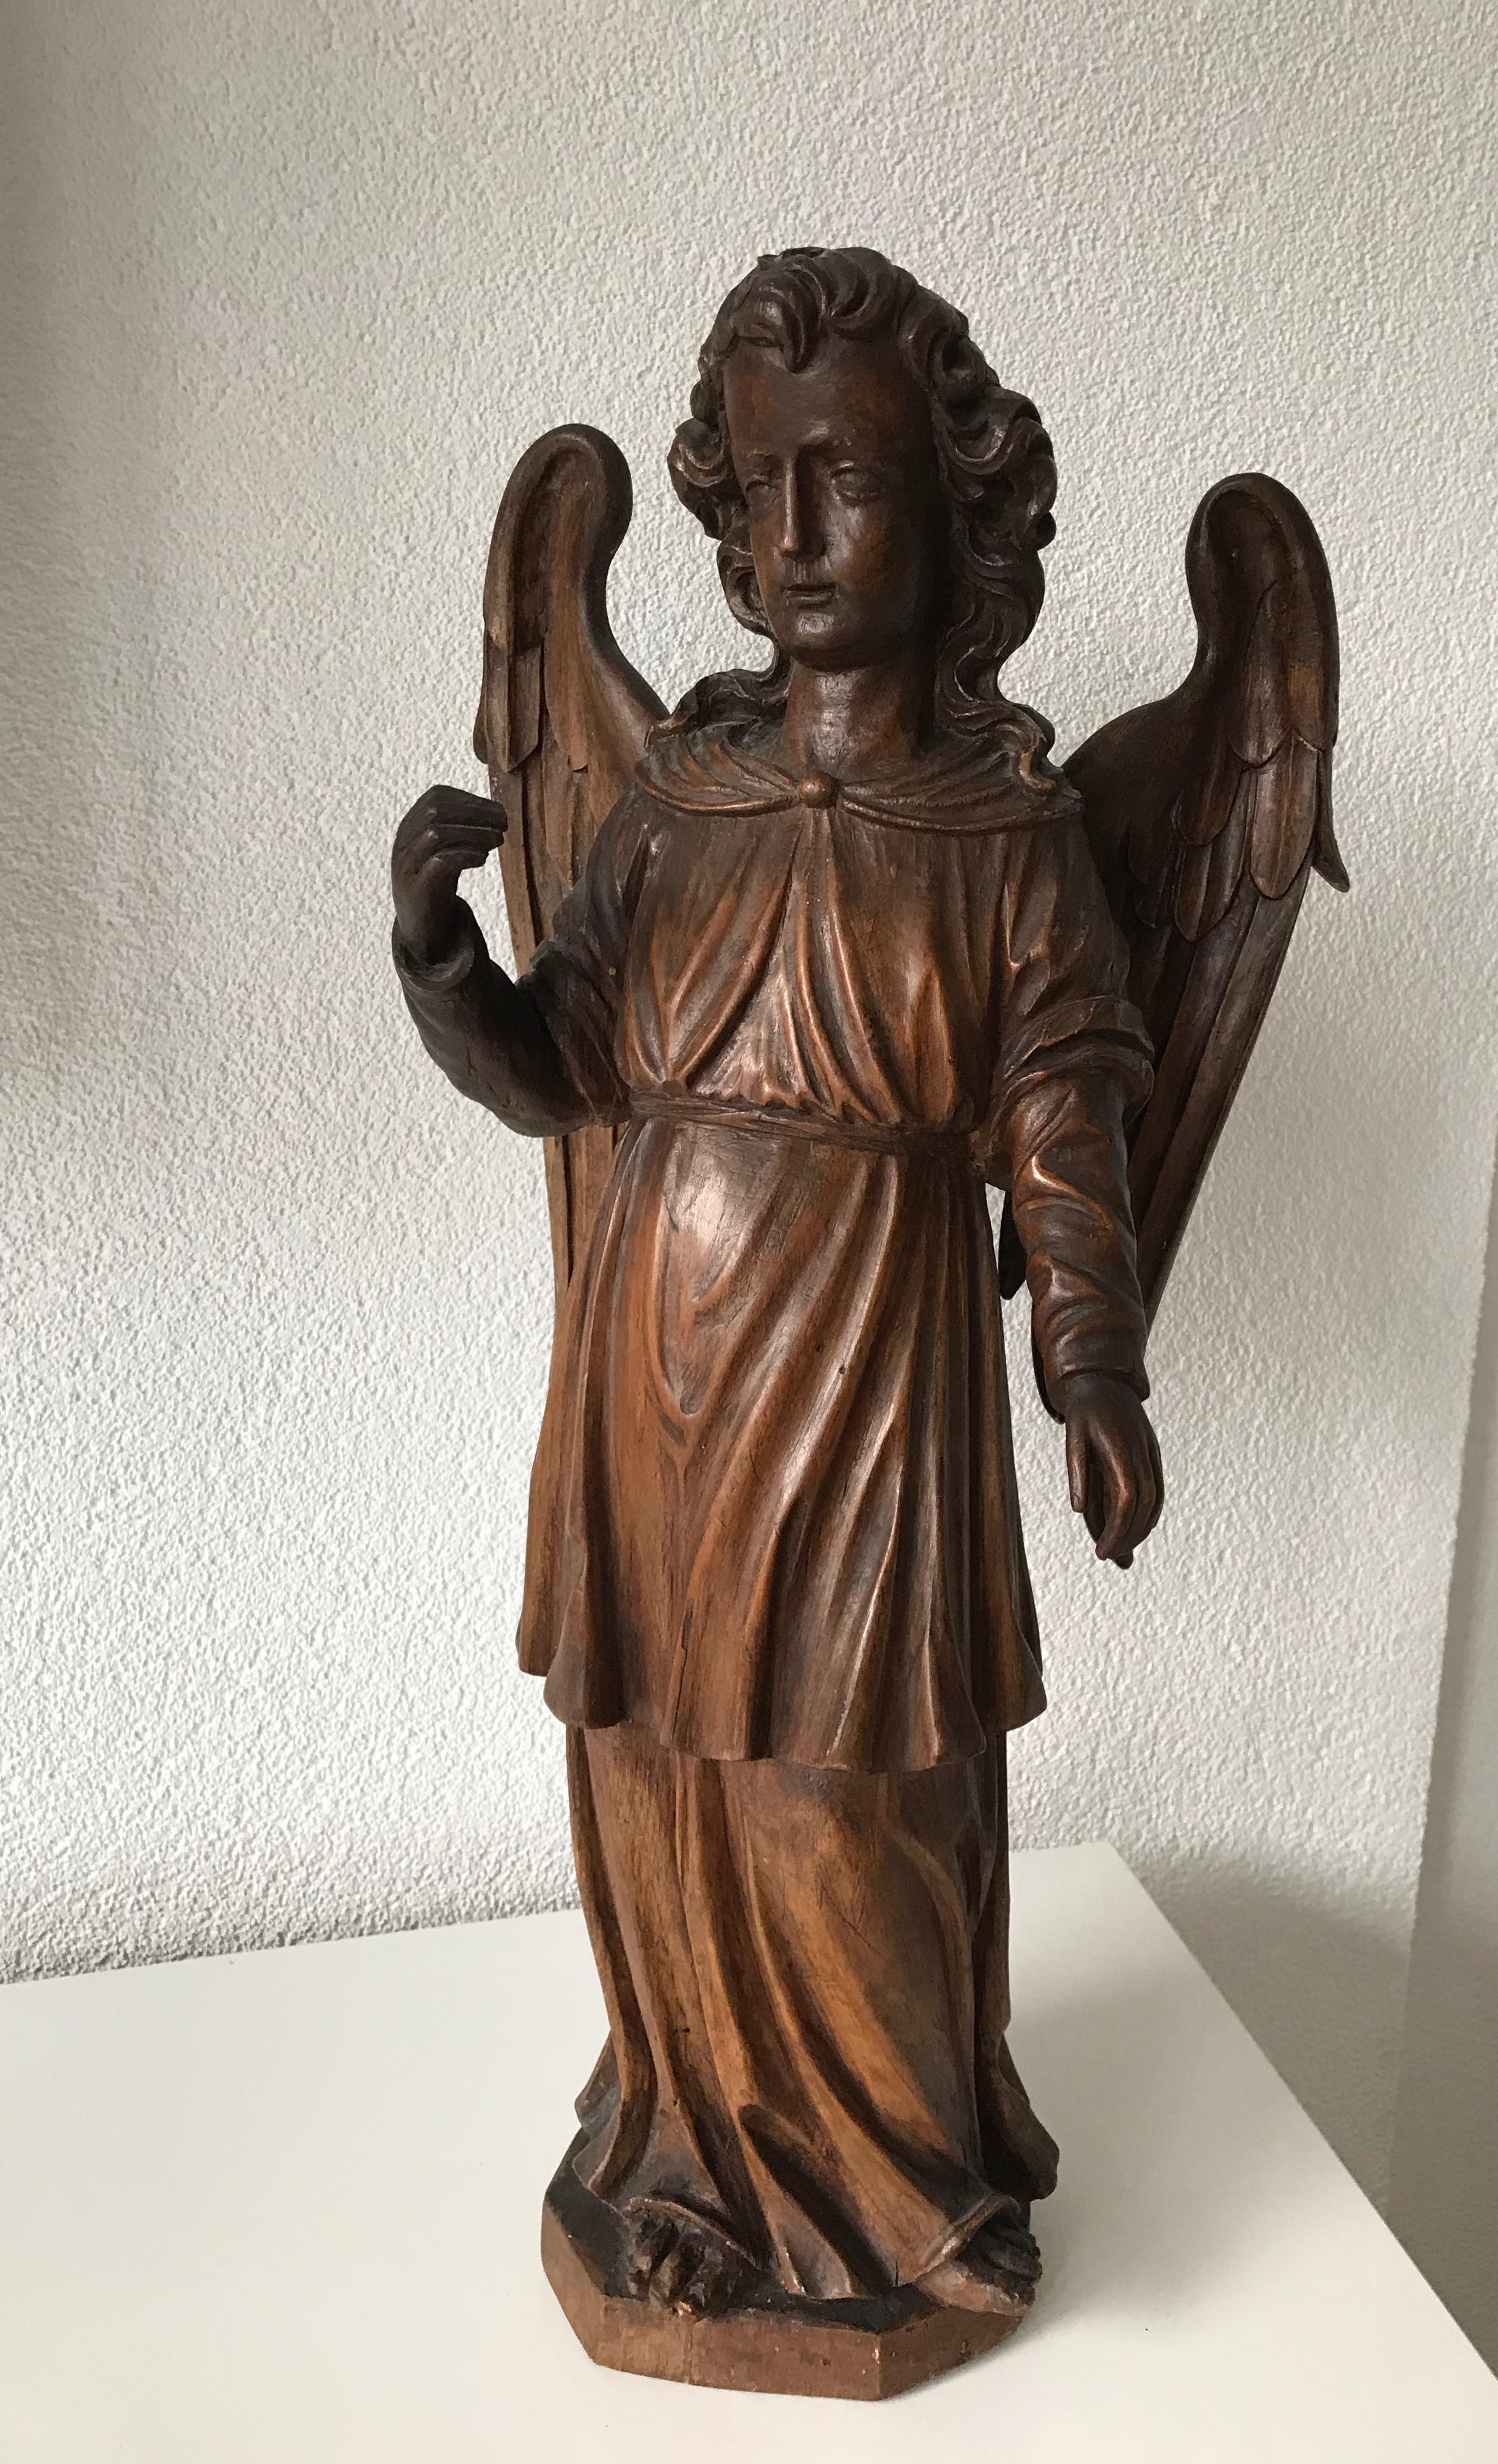 Dutch Hand-Carved Oak Angel Statue / Sculpture with Wings Possibly Saint Michael